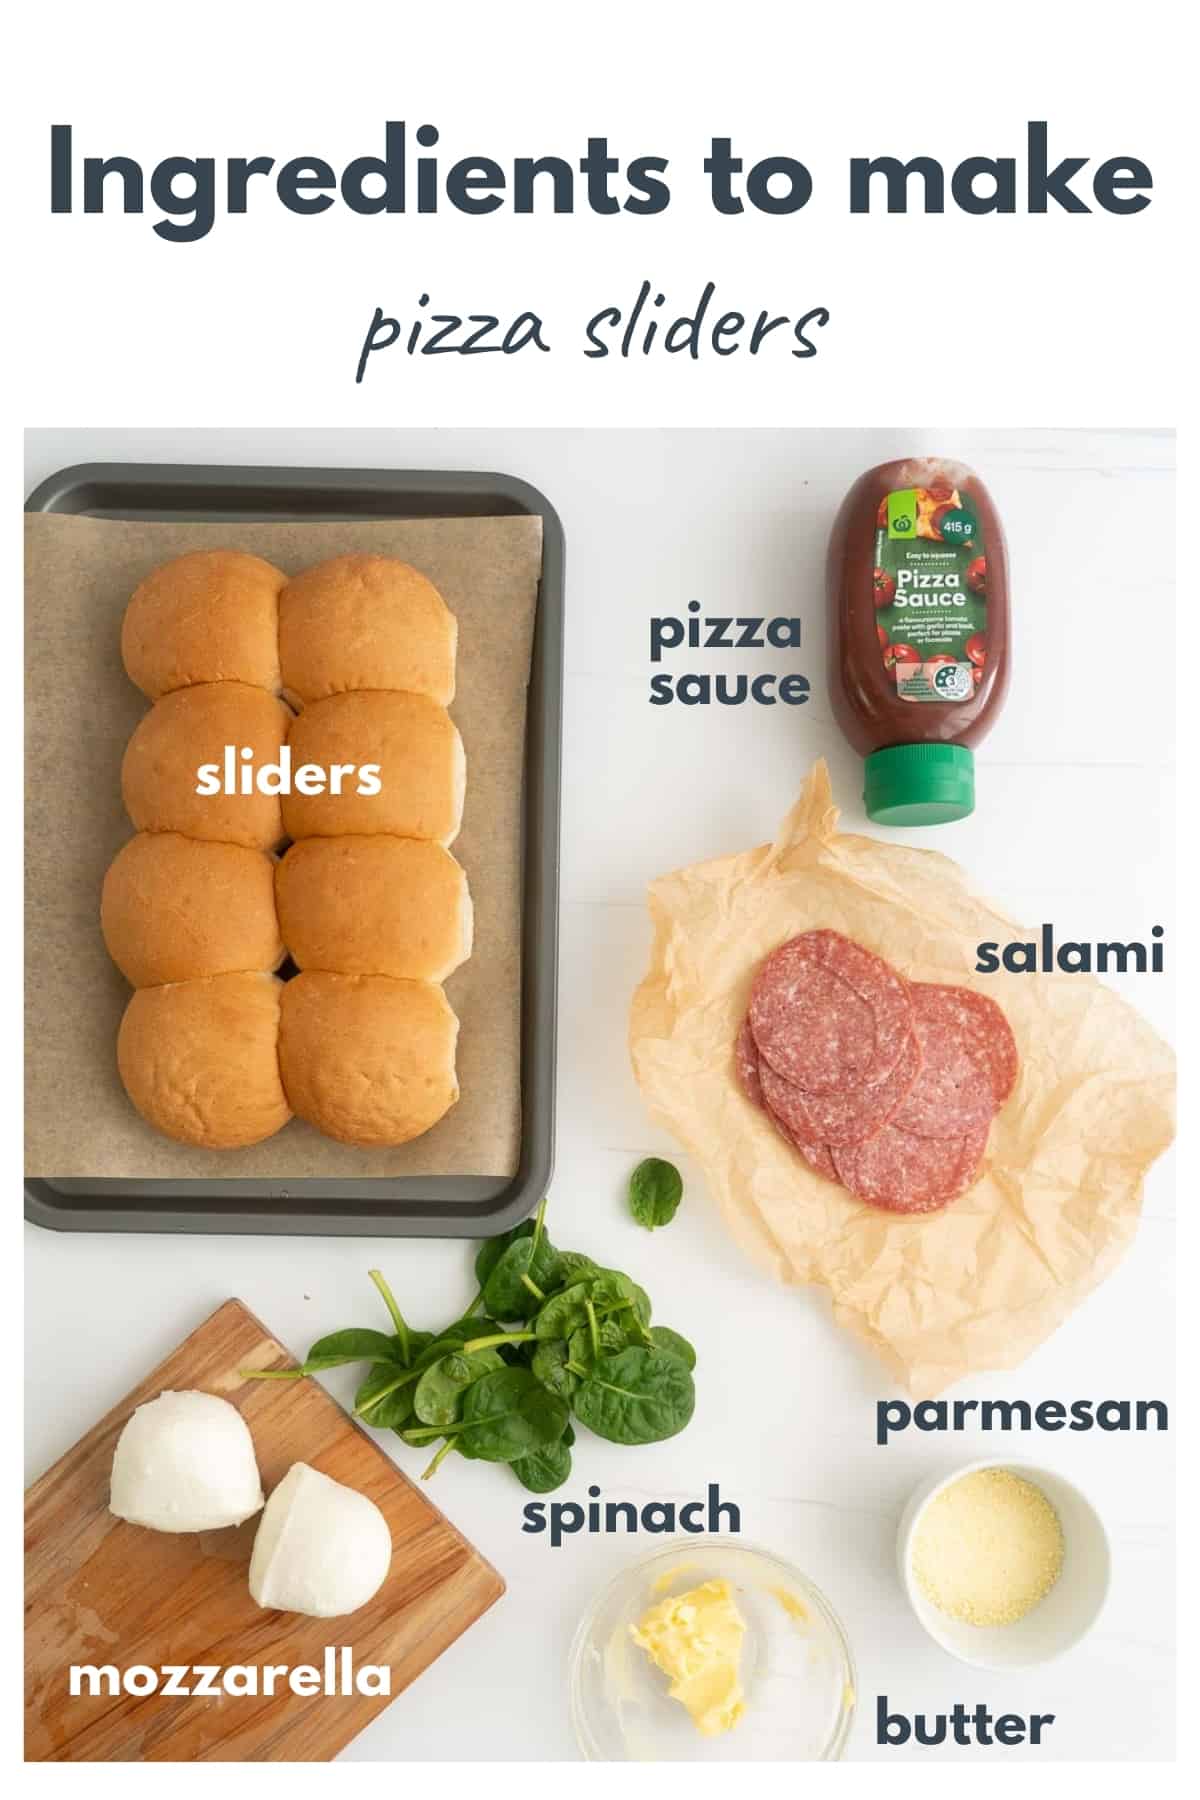 The ingredients to make pizza sliders for kids laid out on a bench top with text overlay.